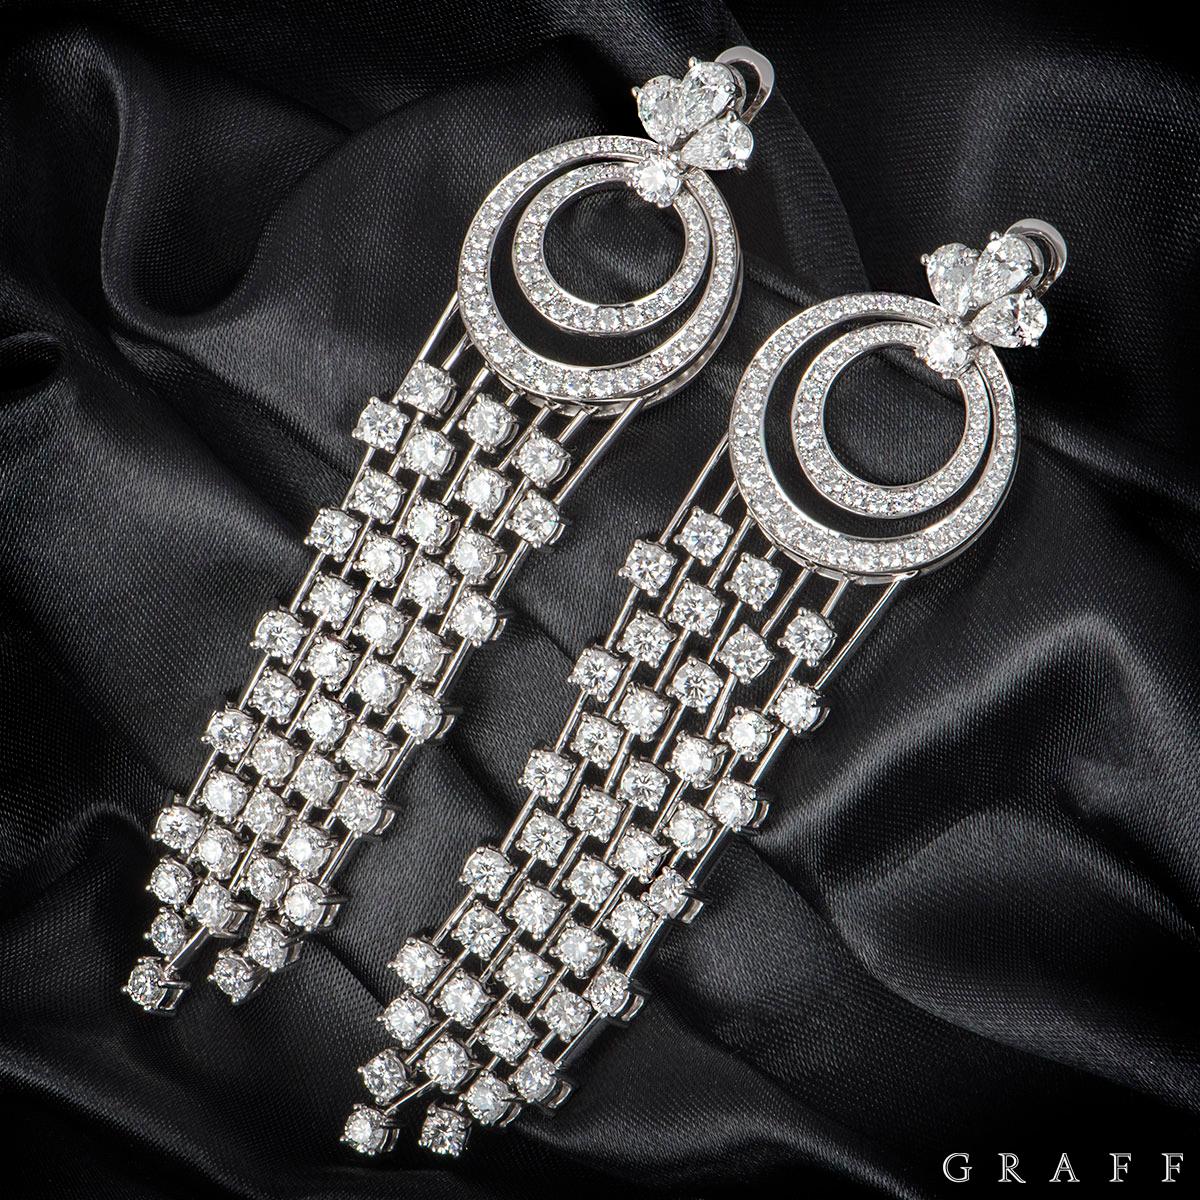 A striking pair of 18k white gold diamond set drop earrings by Graff. The earrings are each composed of 3 pear shaped diamonds at the top with two circular openwork motifs, one inside the other set with pave round brilliant cut diamonds and